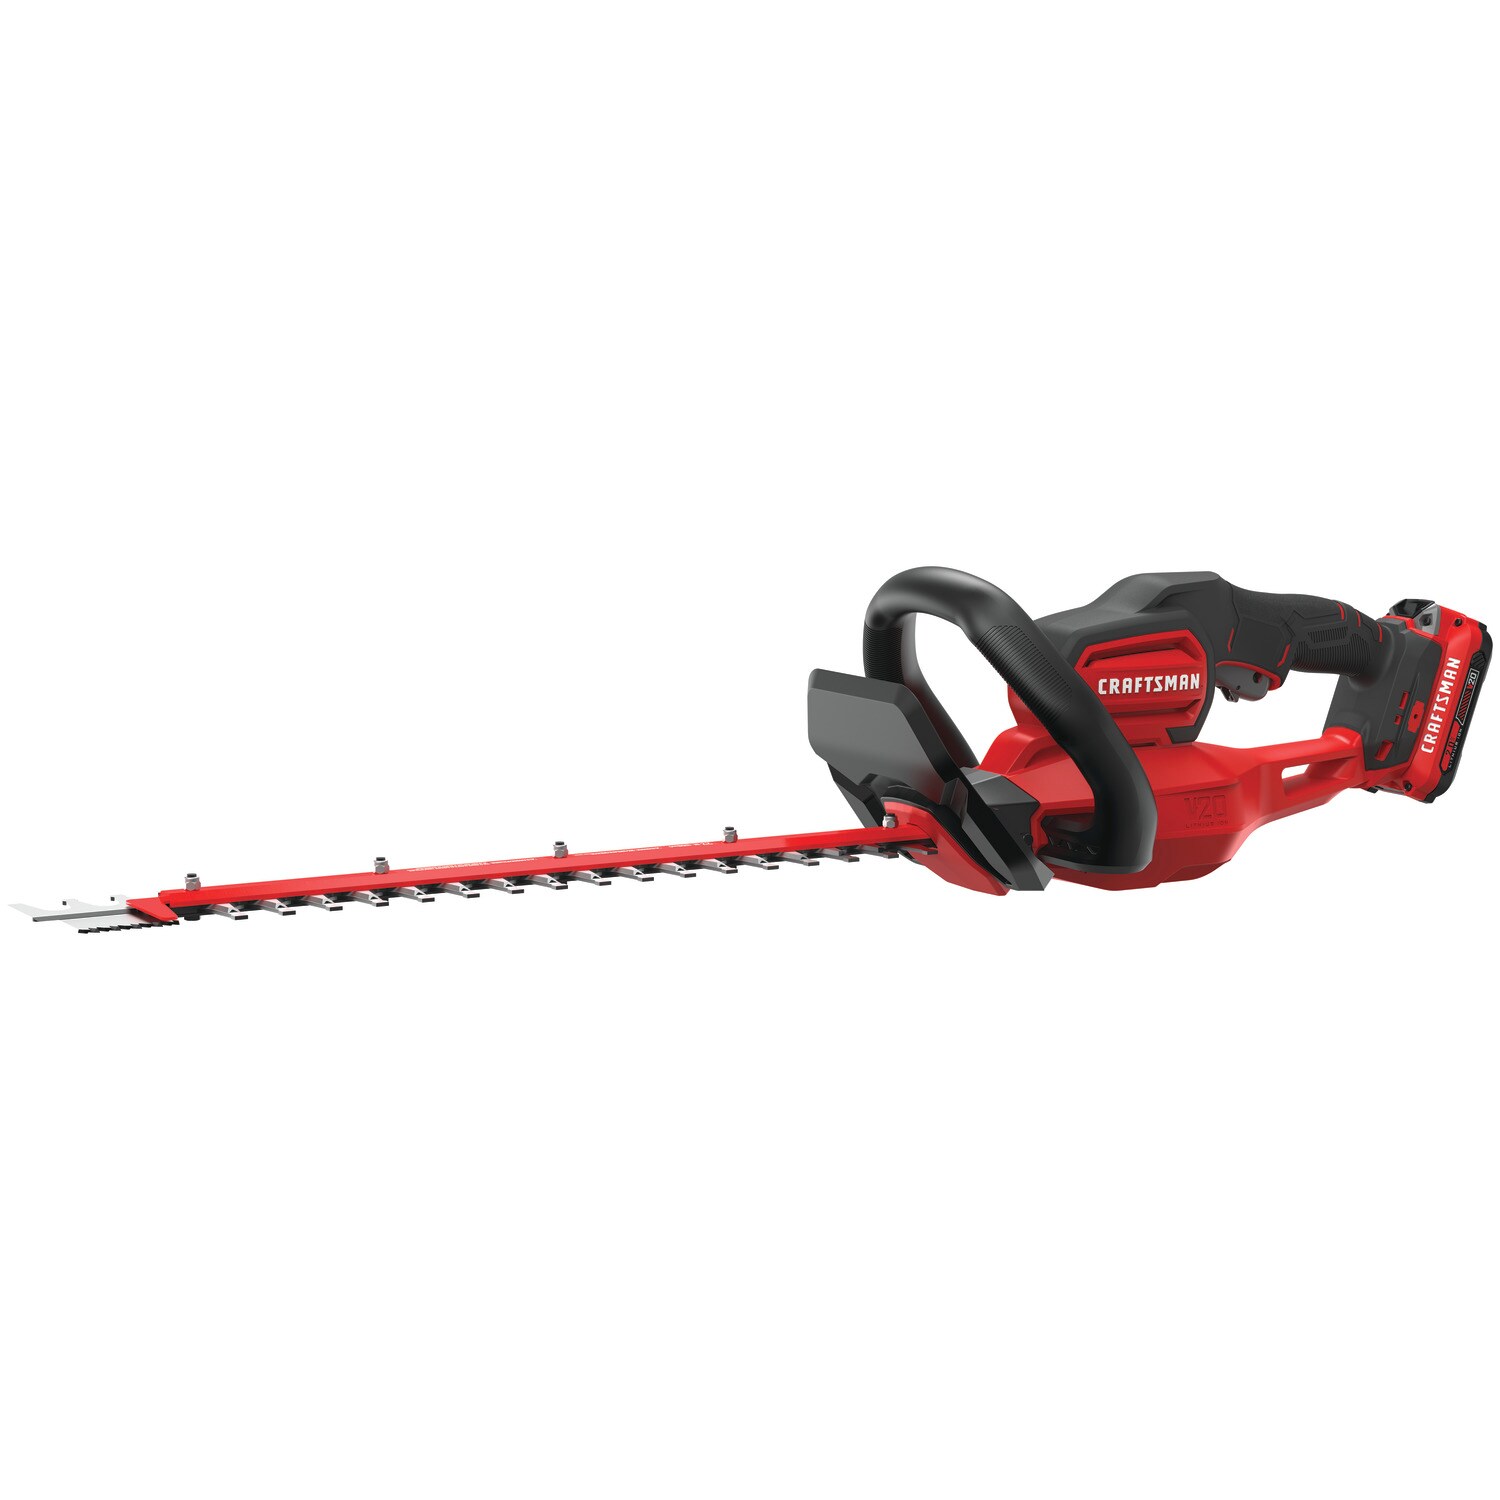 No Charger or Battery Included - Bulk Packaged Sears Craftsman 24V Volt Max Lithium-Ion 22 Cordless Hedge Trimmer Tool Only 